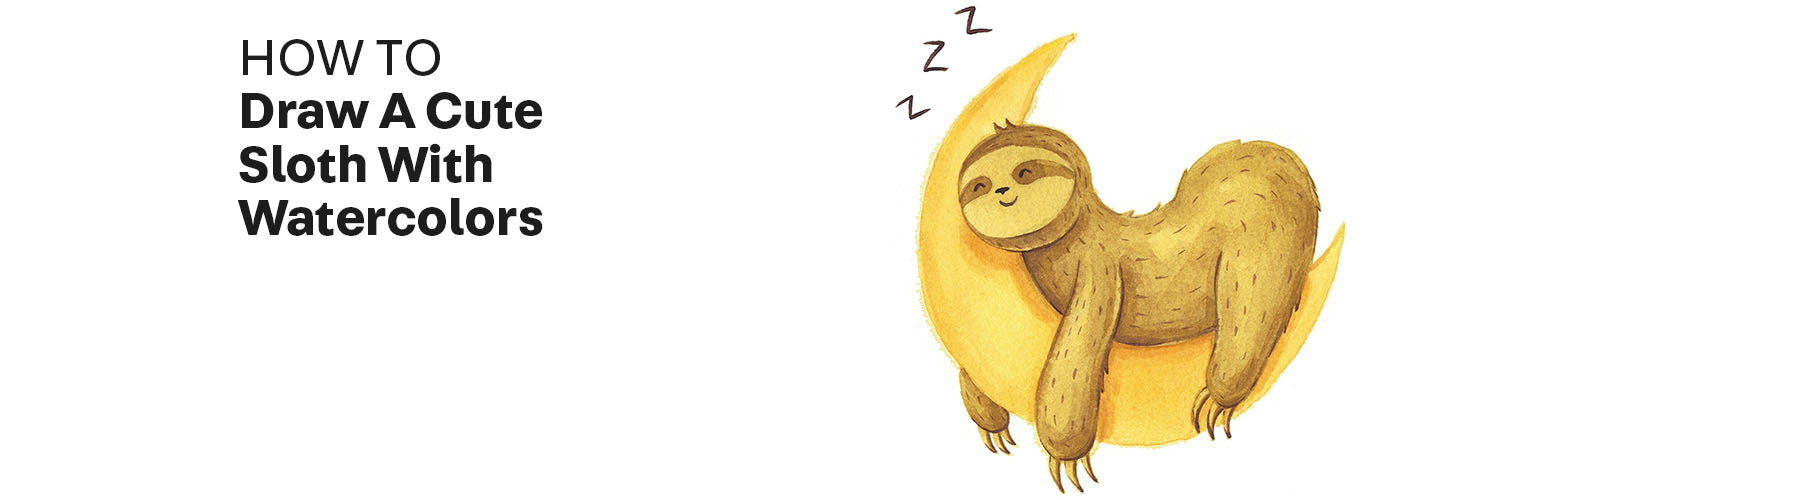 How to Draw a Sloth - Really Easy Drawing Tutorial